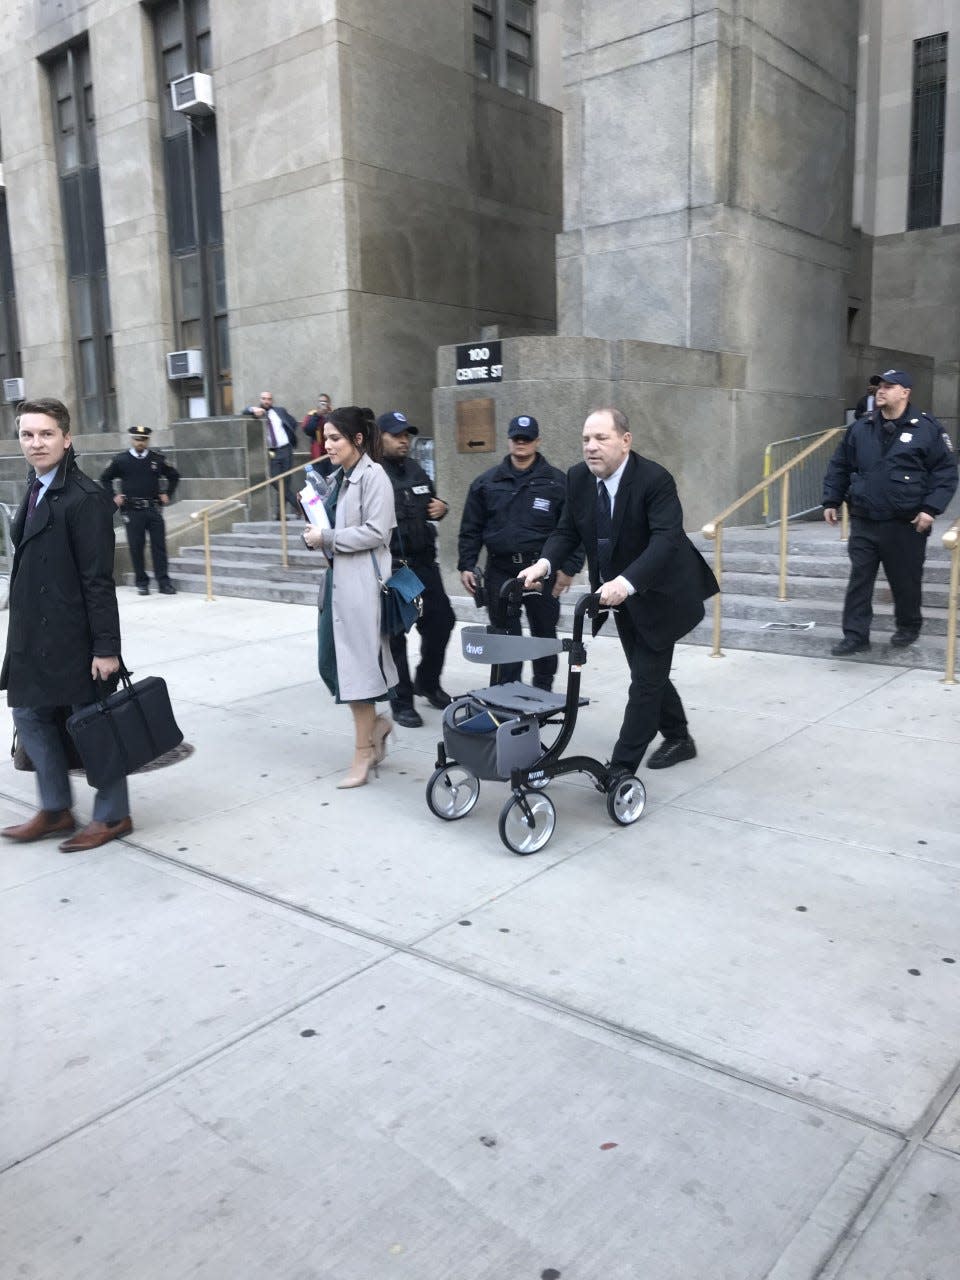 Disgraced former Hollywood film mogul Harvey Weinstein leaves New York State Supreme Court in Manhattan on Feb. 3, 2020 after listening to testimony in his trial for rape and sexual assault.  Weinstein's lawyers say he uses a walker because of recent back surgery